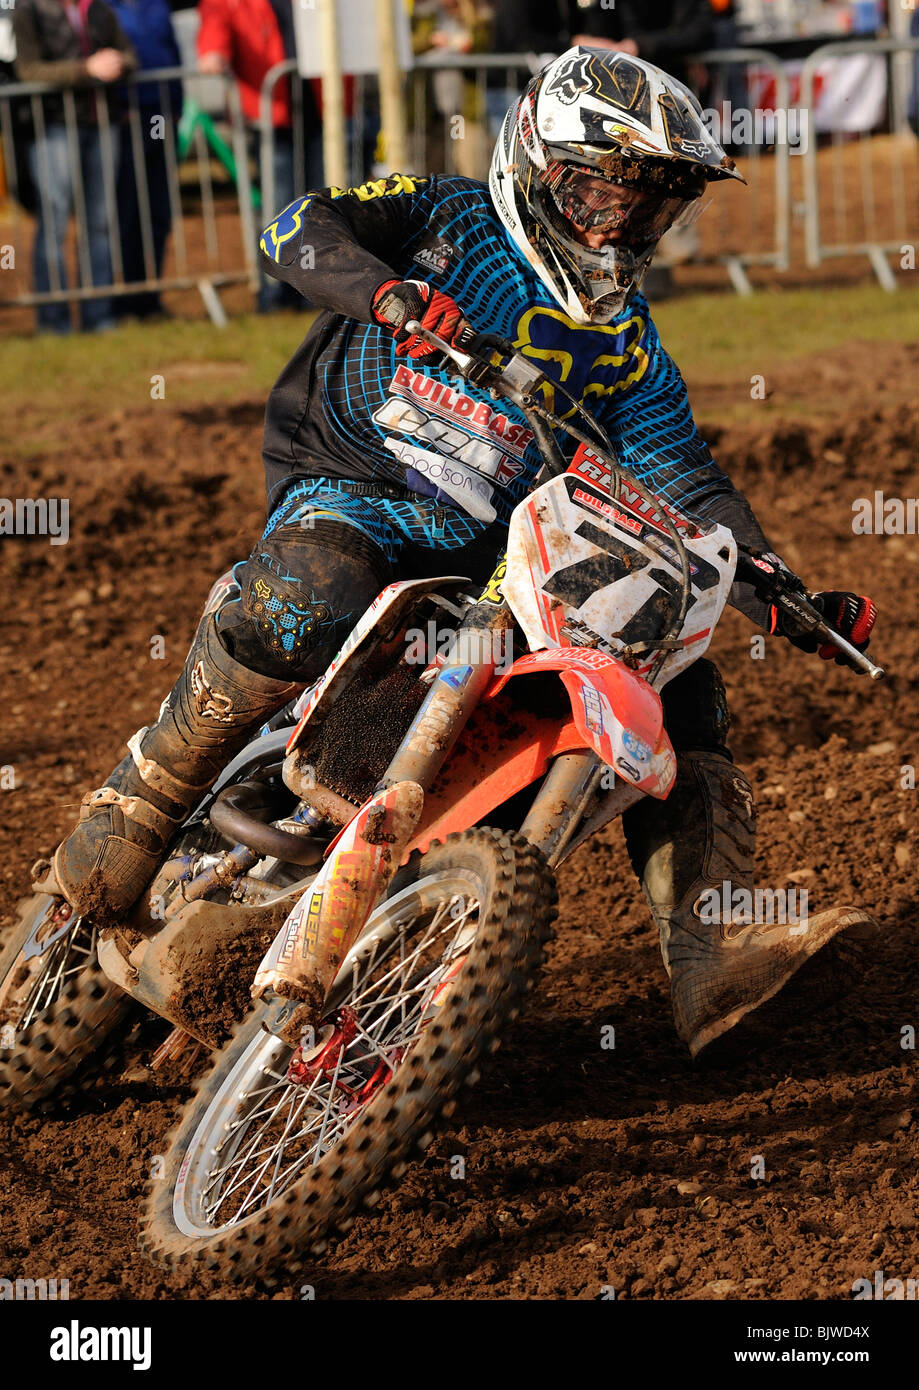 Stephen Sword in action at the 2nd round of the Maxxis British Motocross Champioship at Mallory Park 21st March 2010. Stock Photo